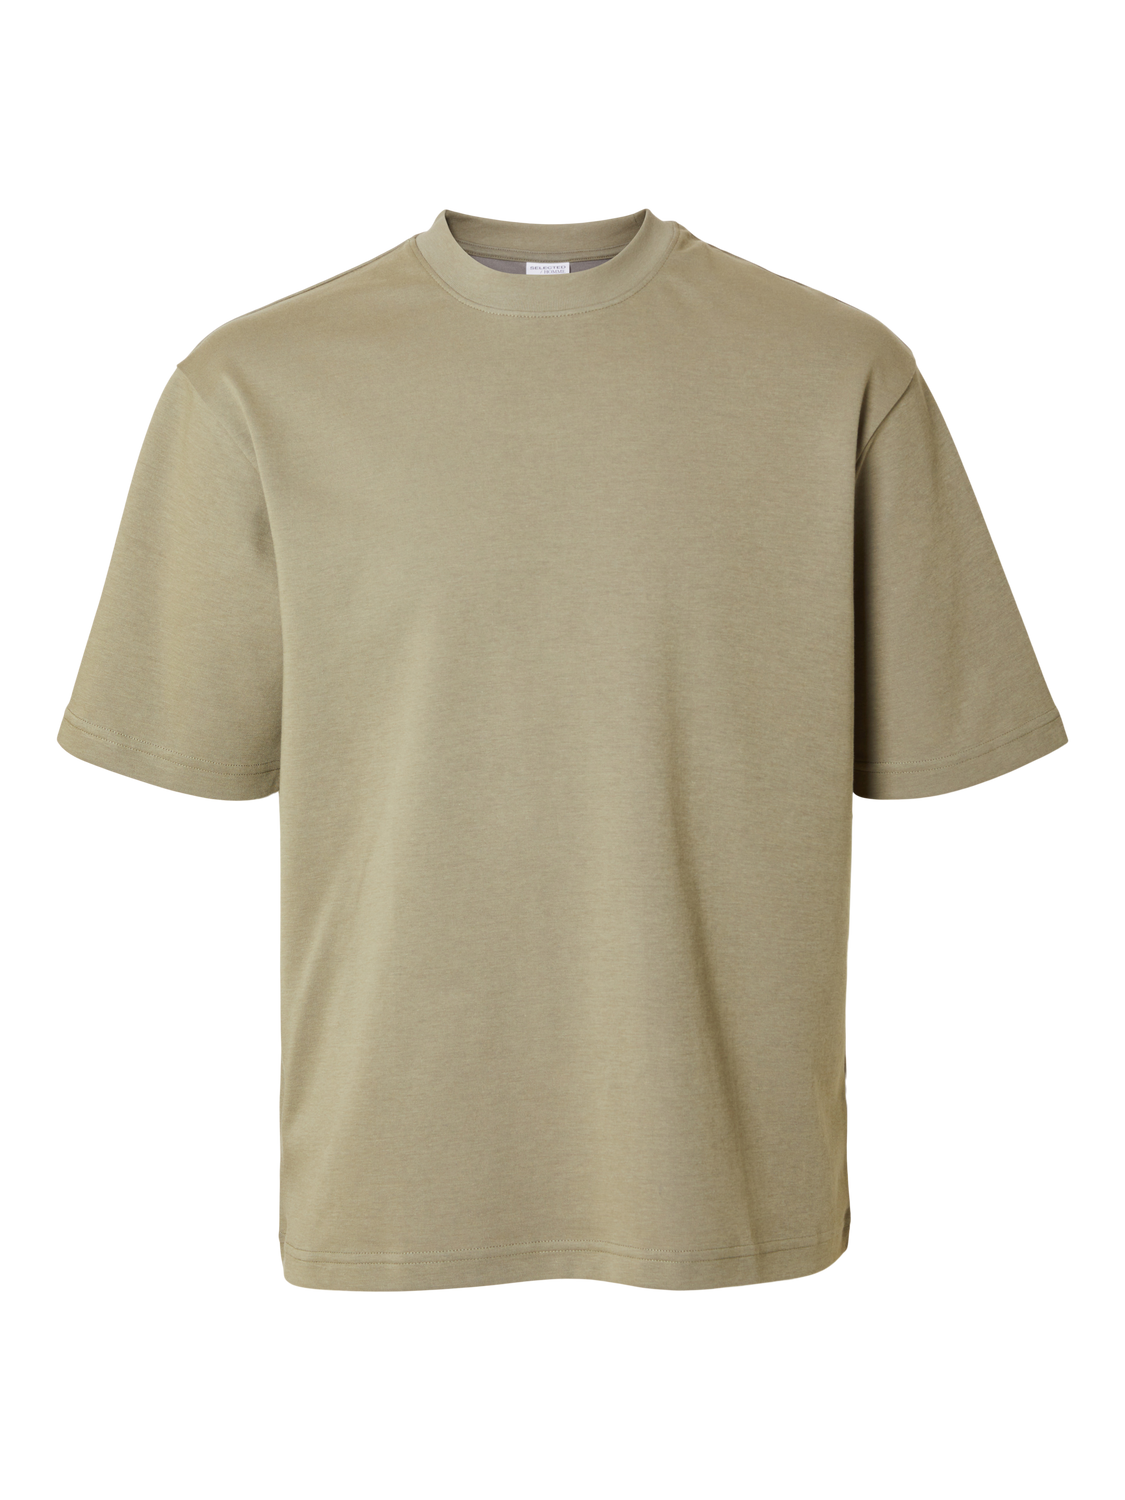 SELECTED HOMME - LOOSE OSCAR T-Shirt - Vetiver